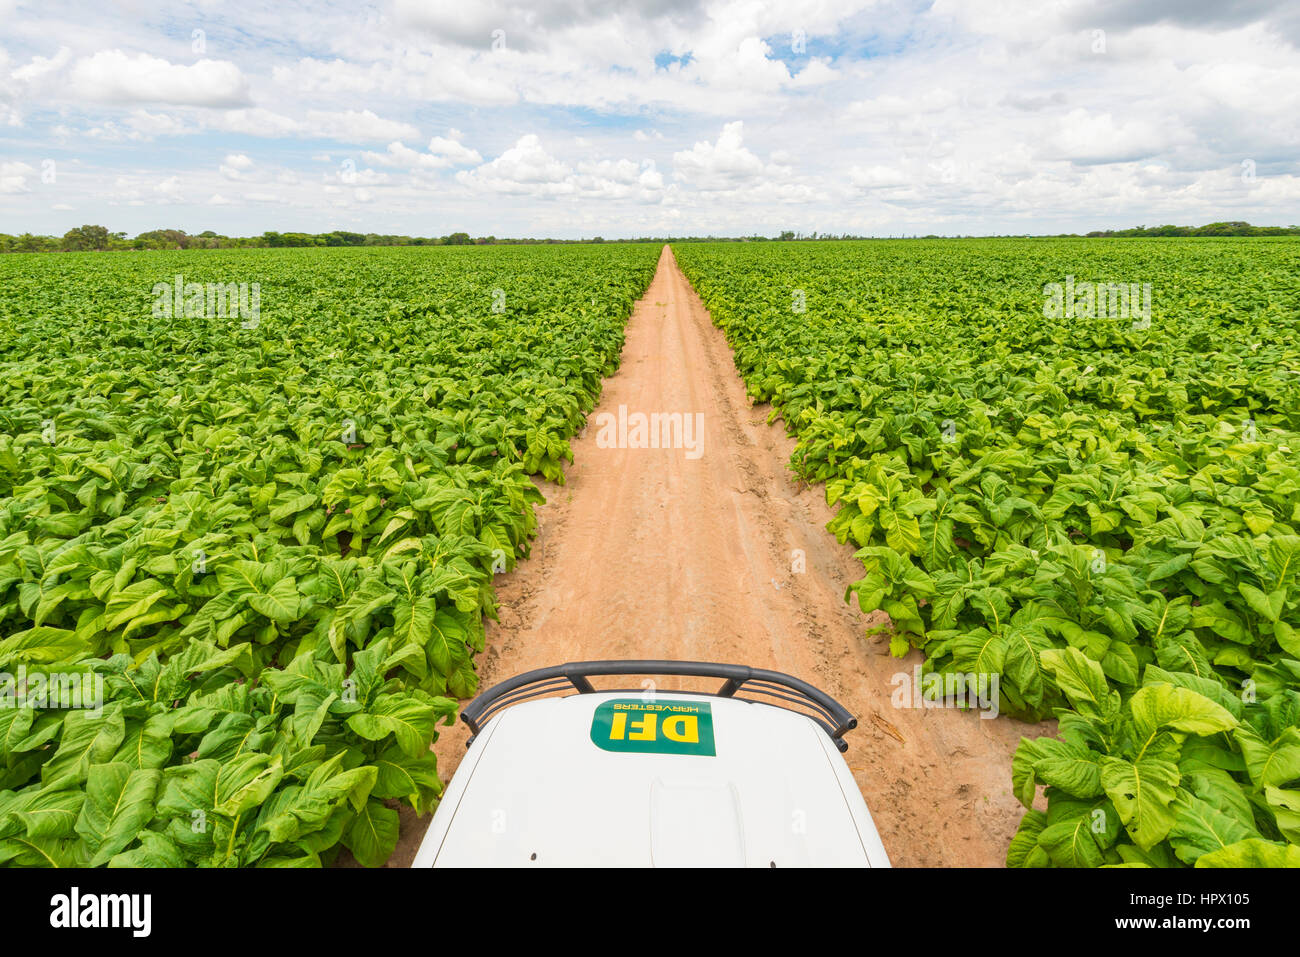 A commercial tobacco crop seen near Harare, Zimbabwe. Stock Photo